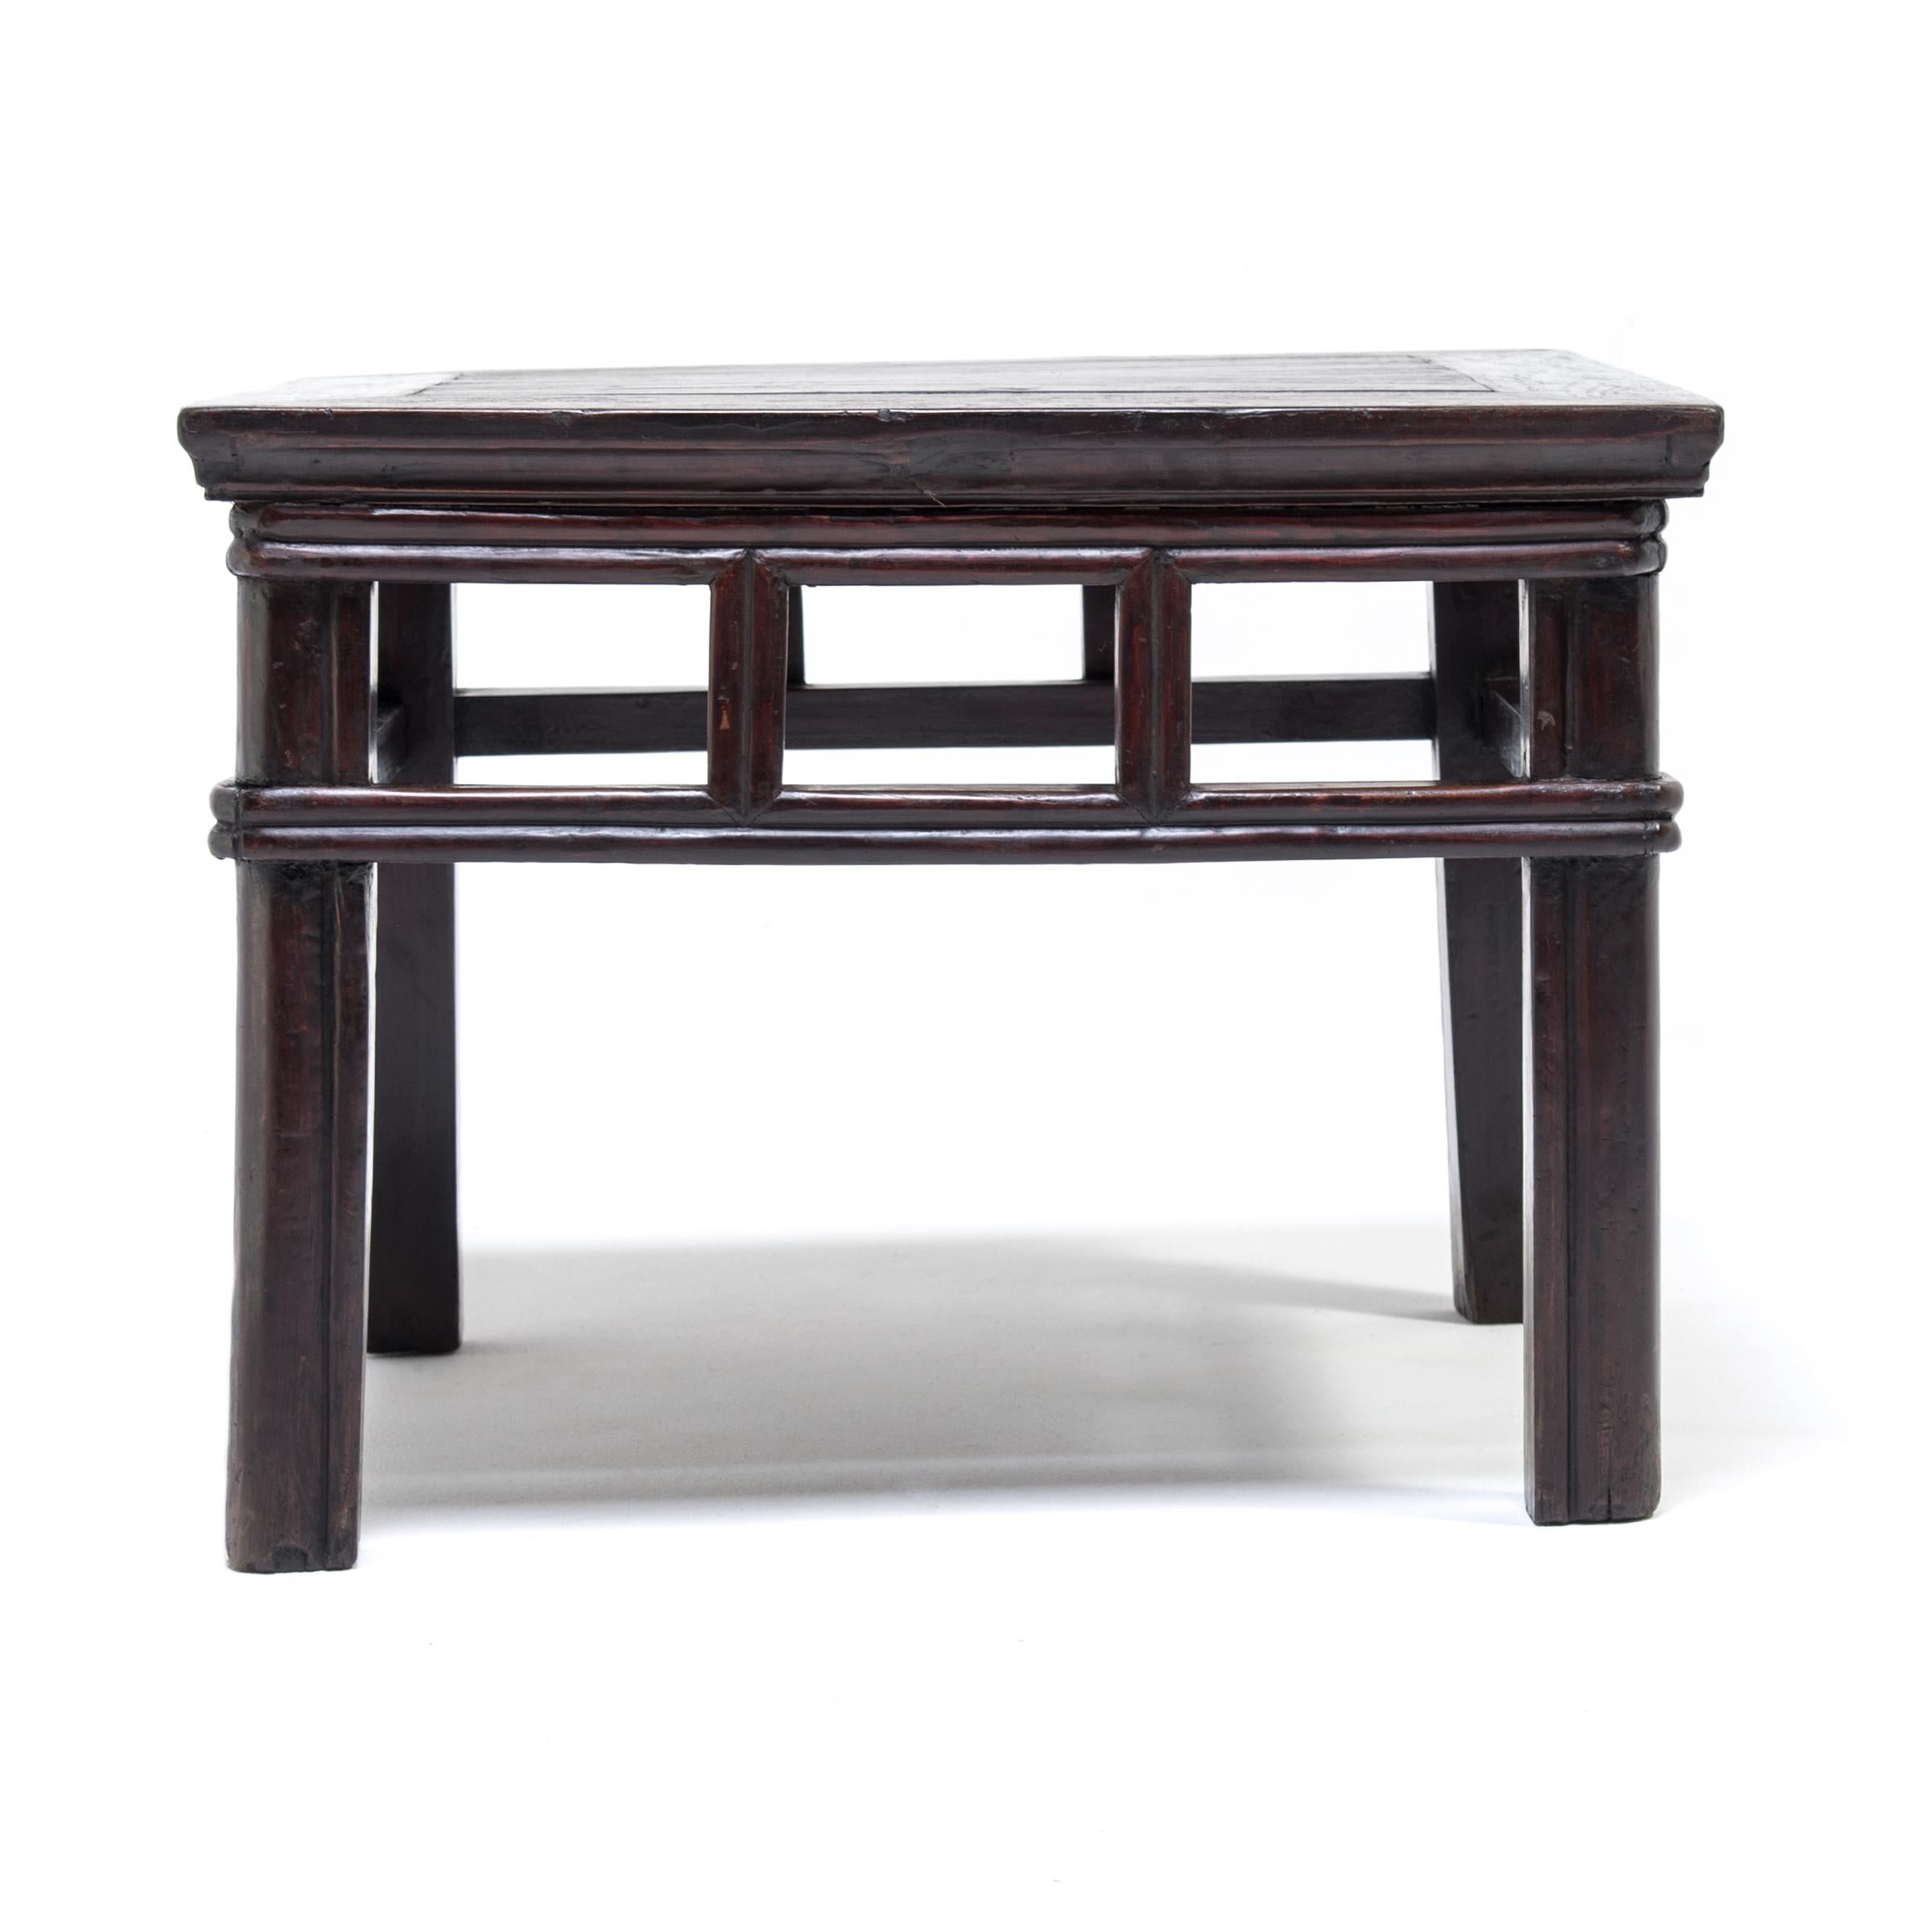 Qing Chinese Black Lacquer Square Stool, c. 1850 For Sale